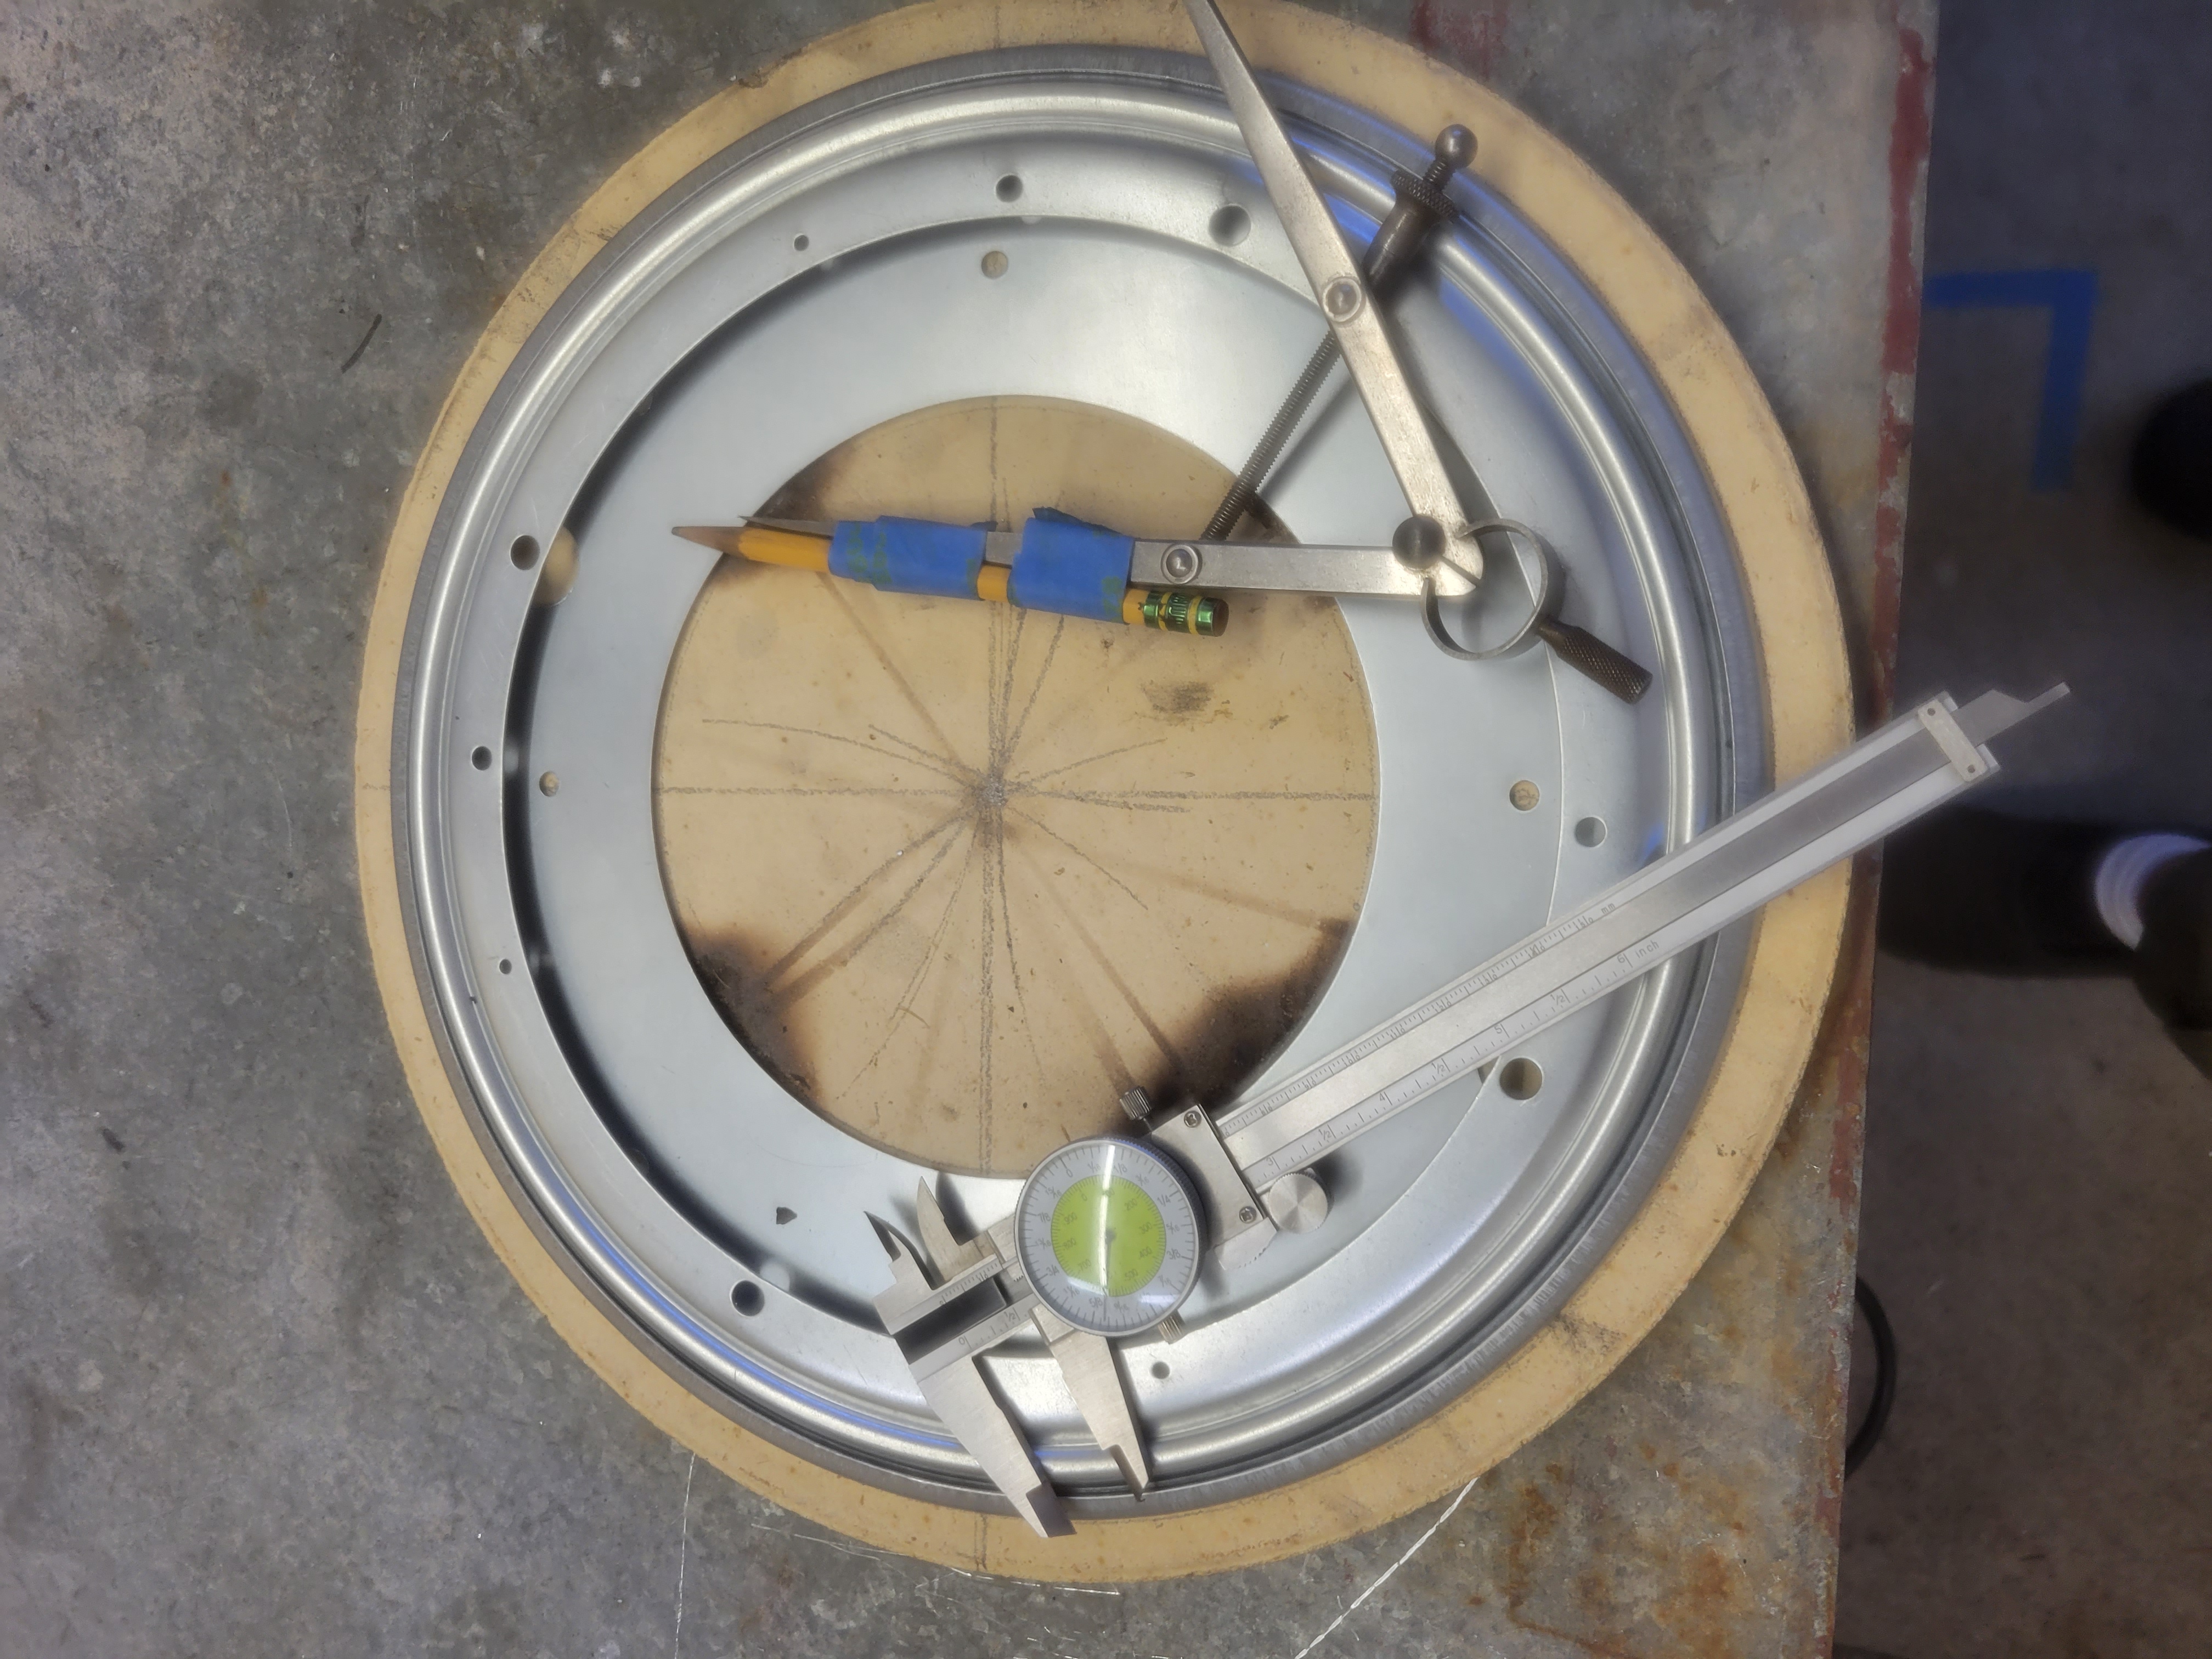 the lazy susan, centered on the stone, topped with a compass and measuring guage